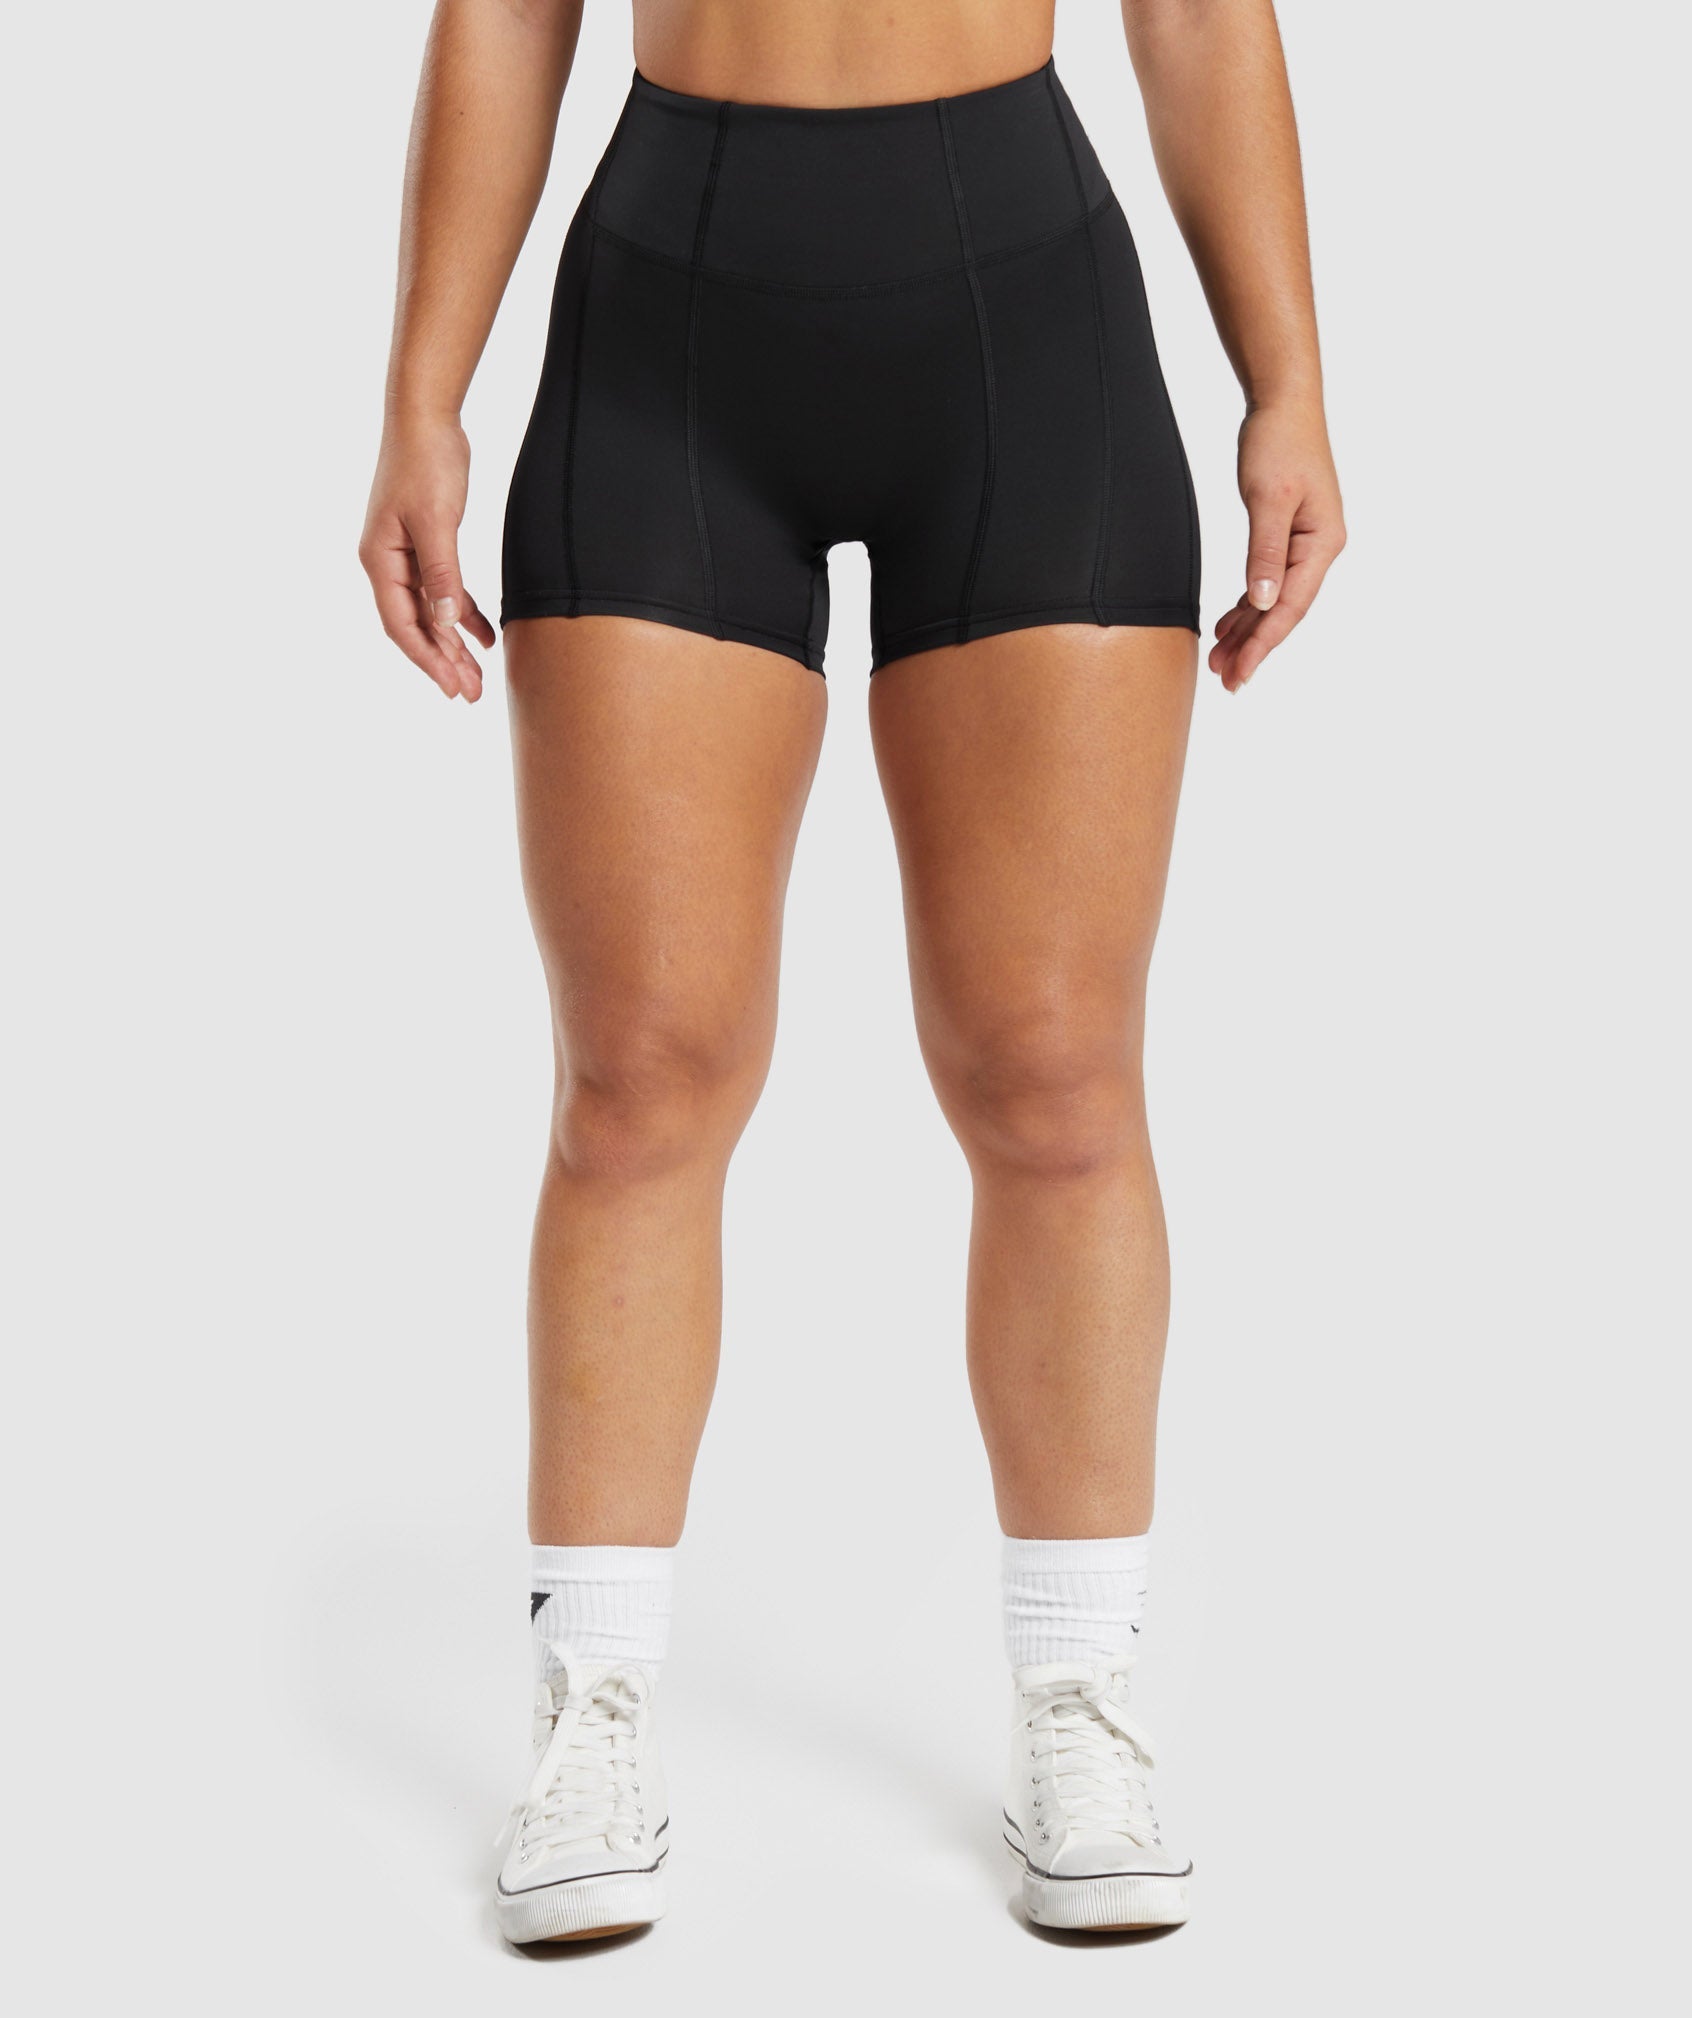 GS Power High Rise Shorts in Black is out of stock